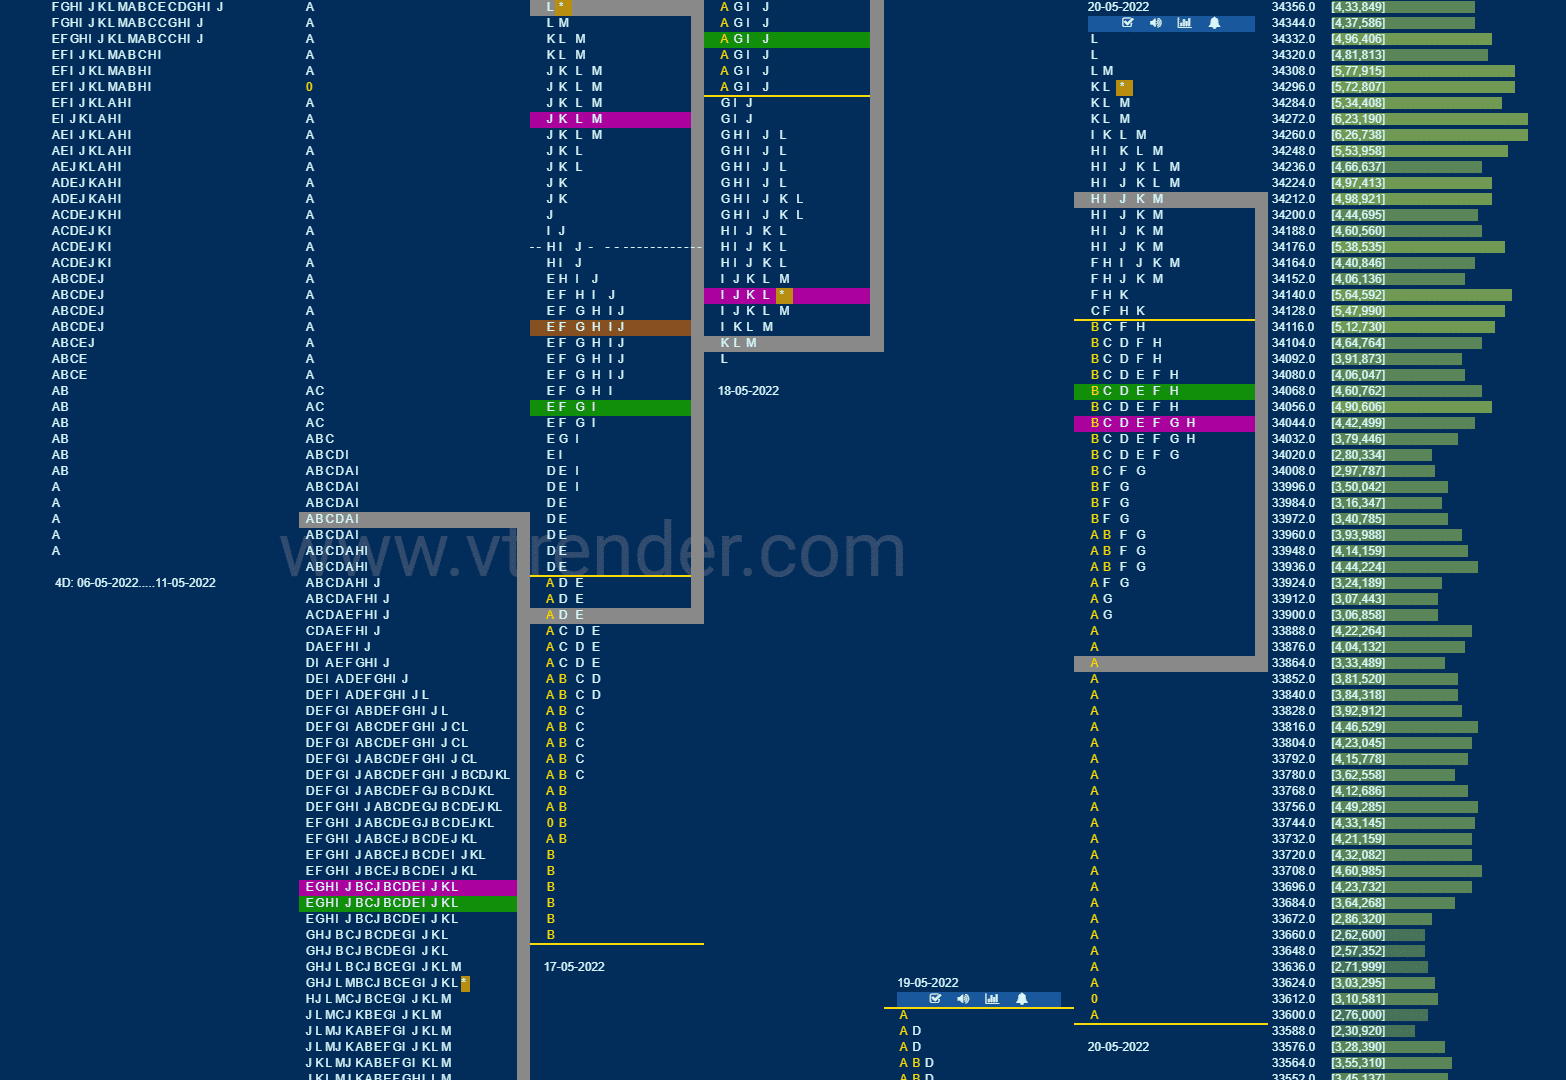 Bnf 14 Market Profile Analysis Dated 20Th May 2022 Banknifty Futures, Charts, Day Trading, Intraday Trading, Intraday Trading Strategies, Market Profile, Market Profile Trading Strategies, Nifty Futures, Order Flow Analysis, Support And Resistance, Technical Analysis, Trading Strategies, Volume Profile Trading